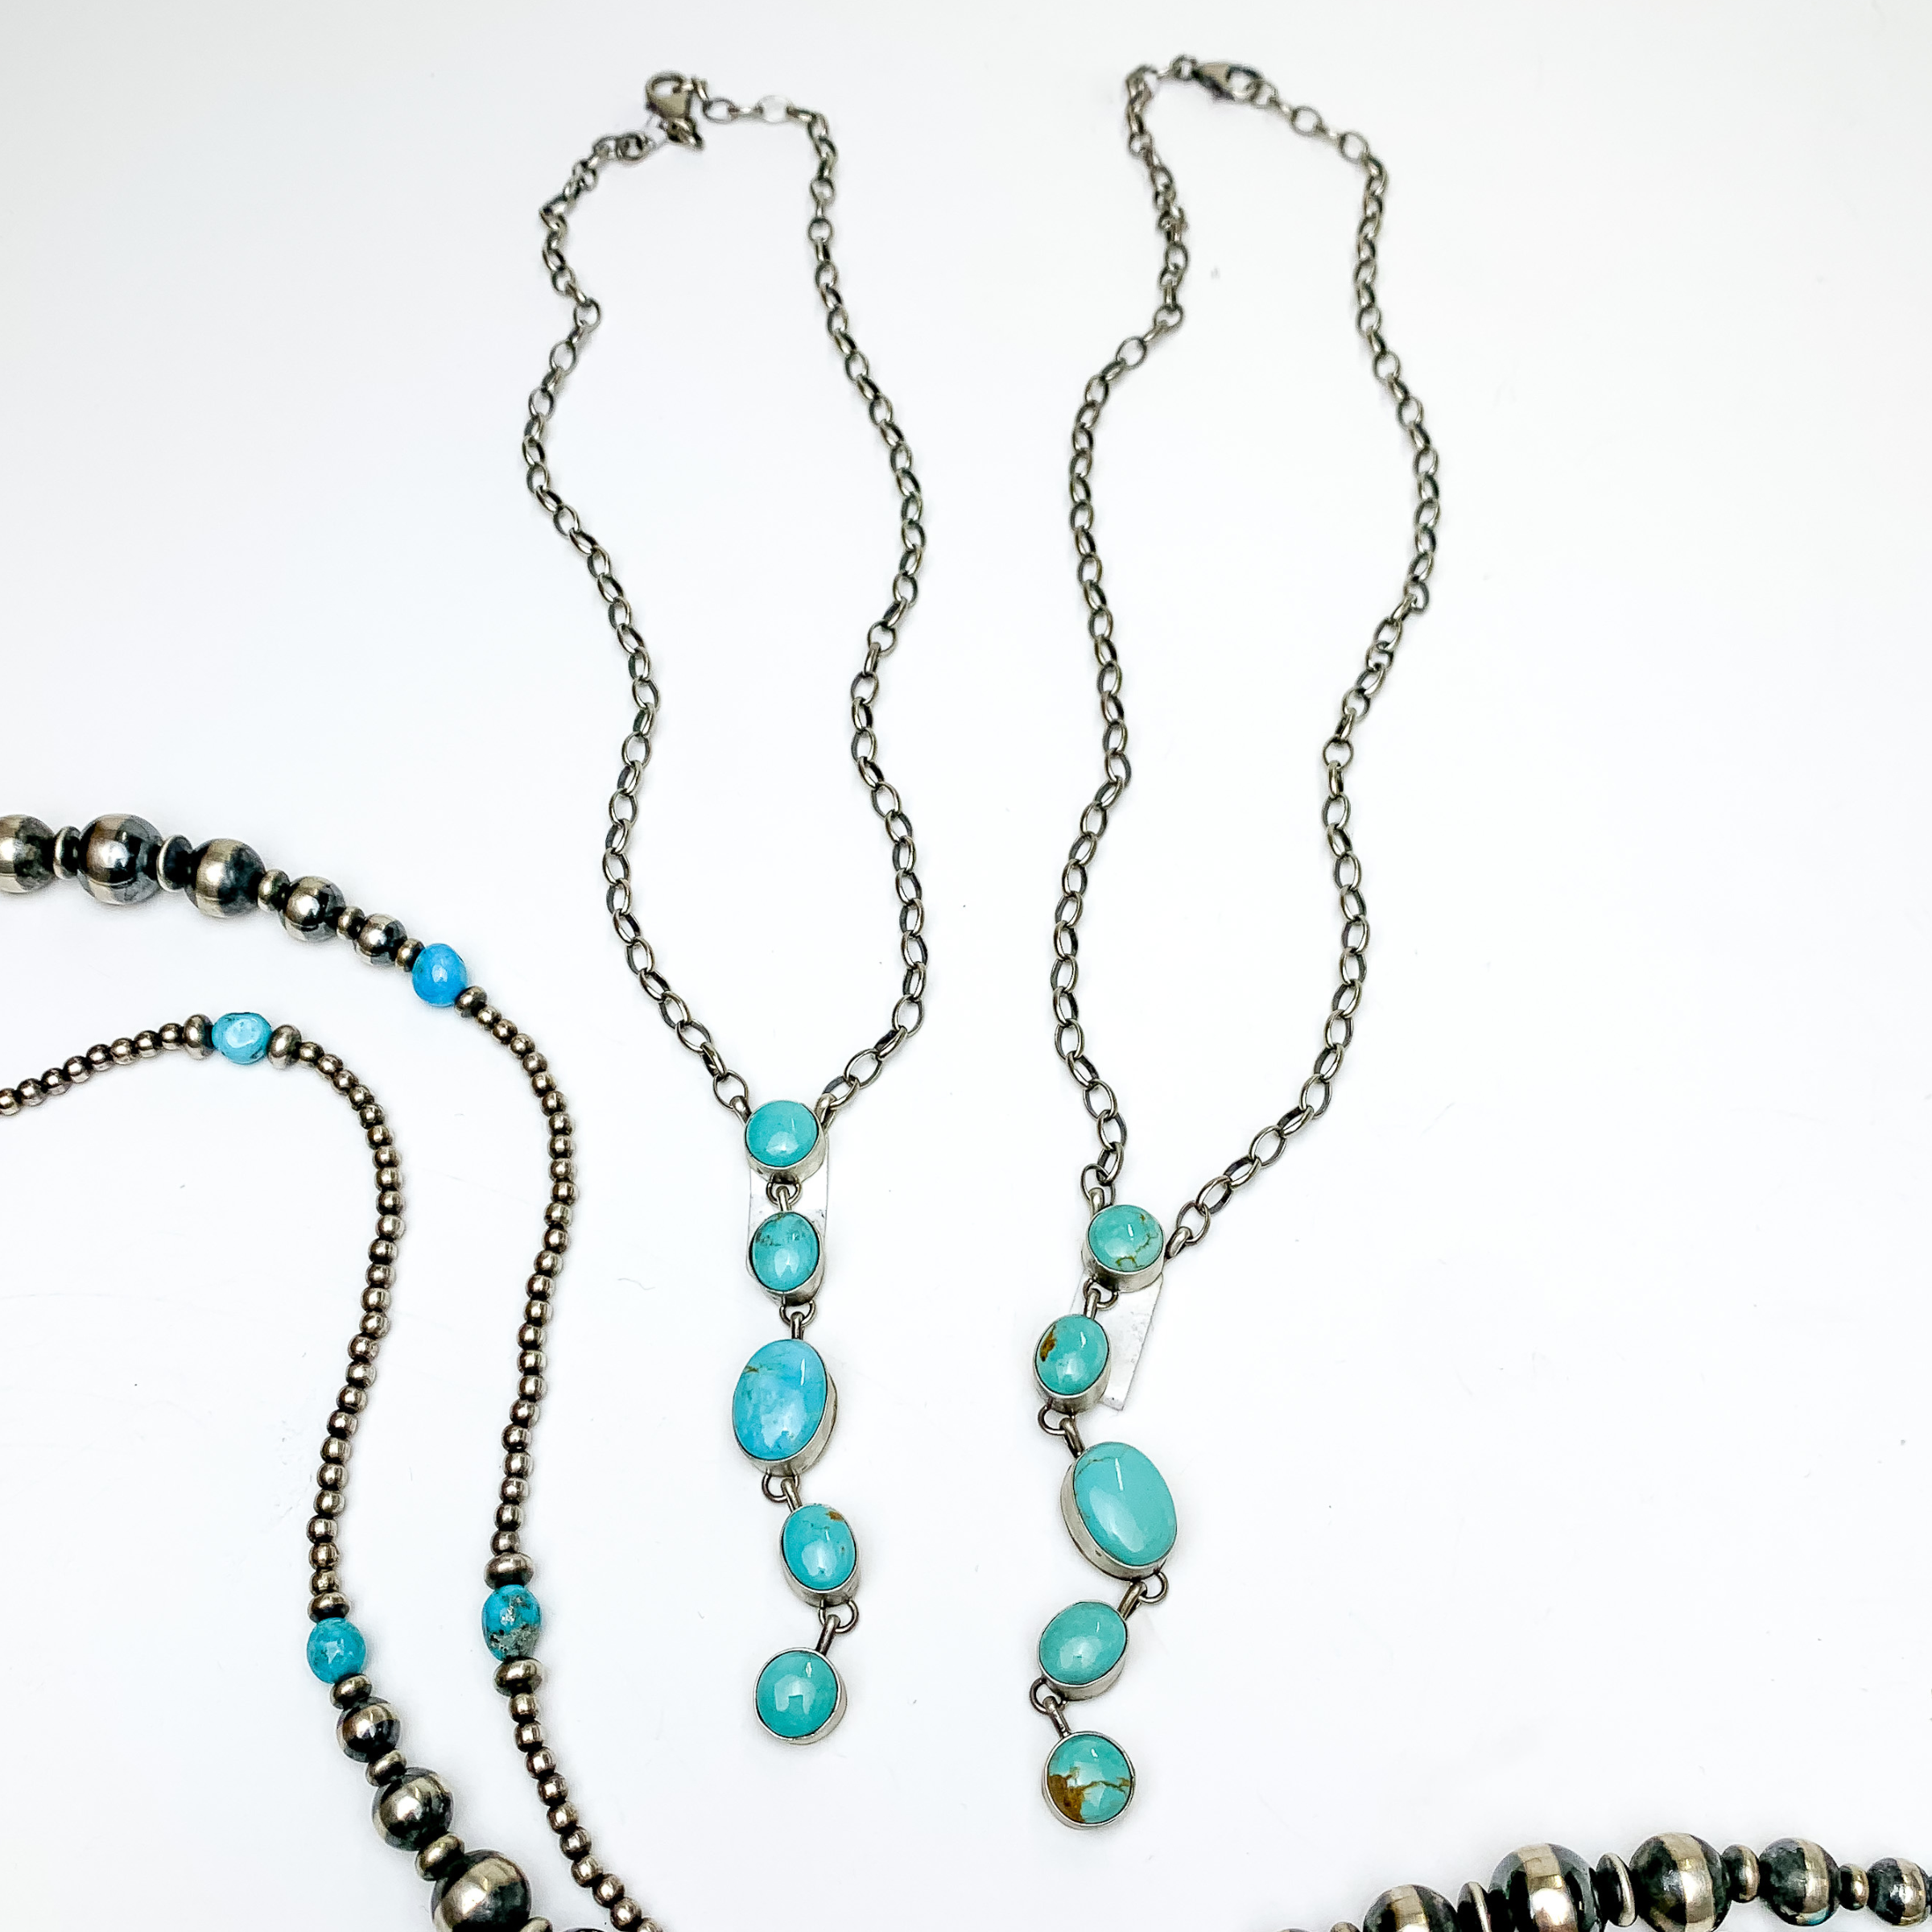 Two silver chain necklaces with a lariat stone pendant. The pendant ias five, oval turquoise stones. These necklaces are pictured on a white background with silver beads at the bottom of the picture.  